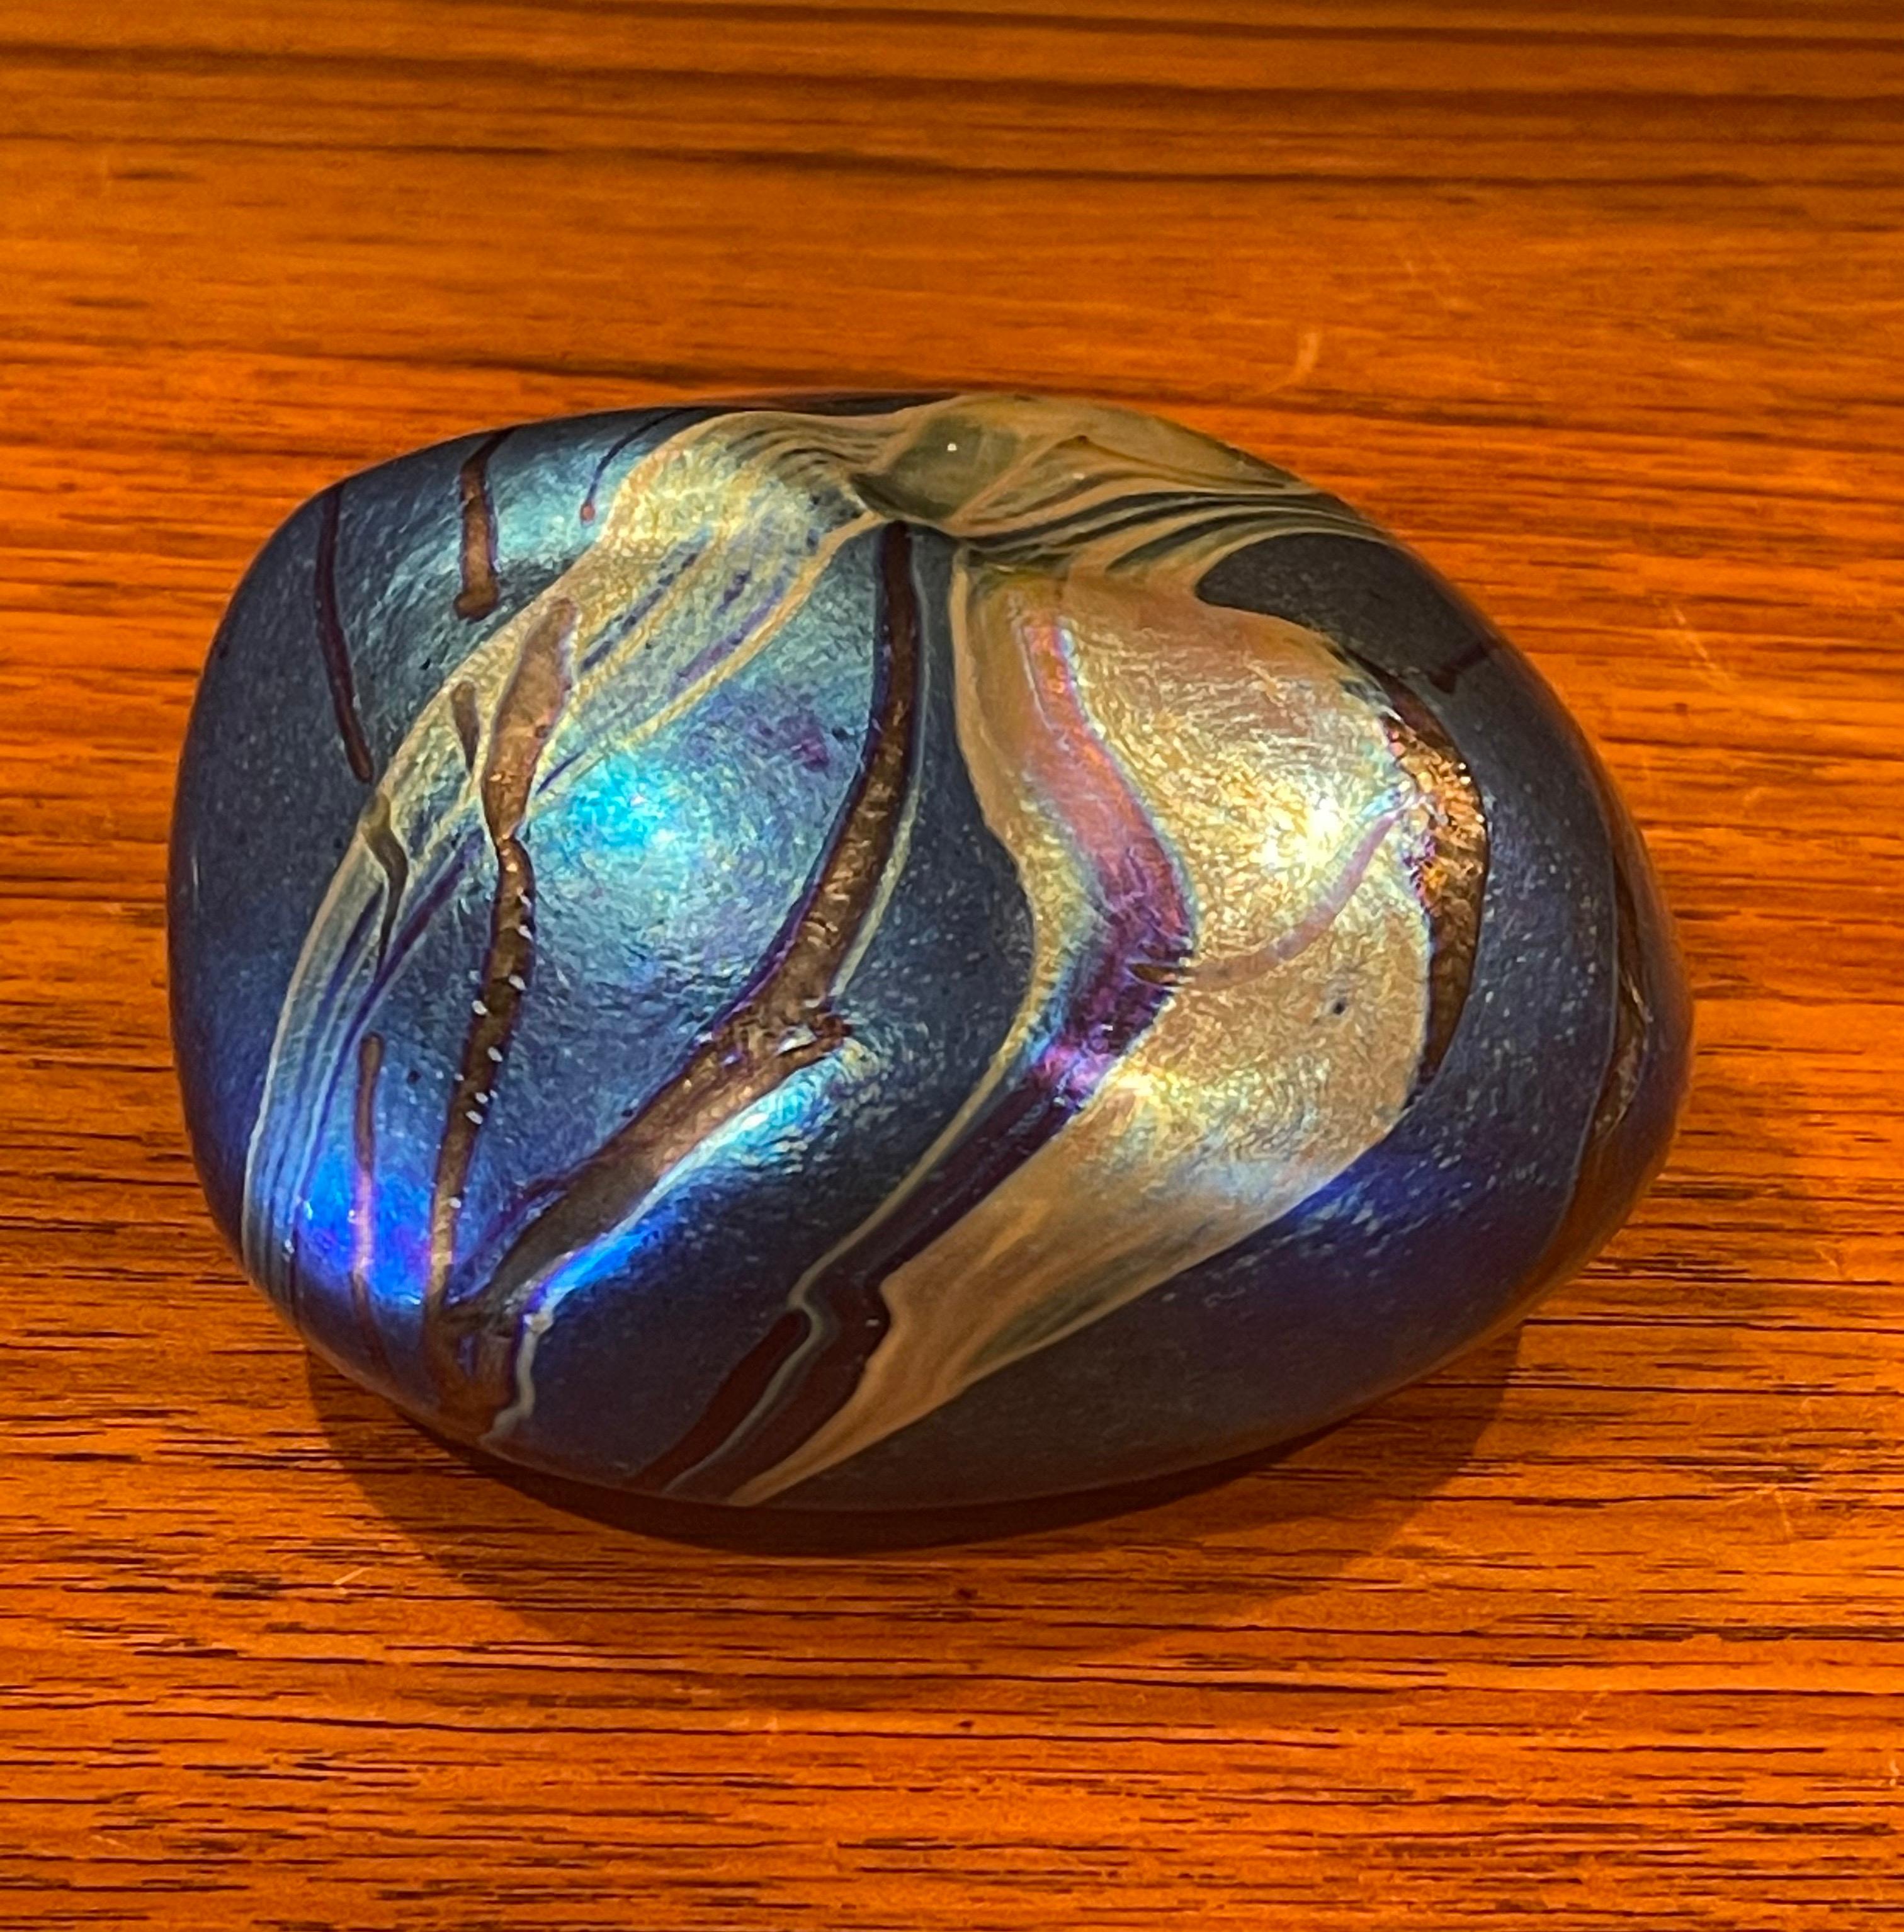 Gorgeous iridescent art glass paperweight by Siddy Langley, circa 2003. The paperweight of compressed circular form over a purple iridescent base with gold and black streaks. Signed and dated on the underside. #1502.